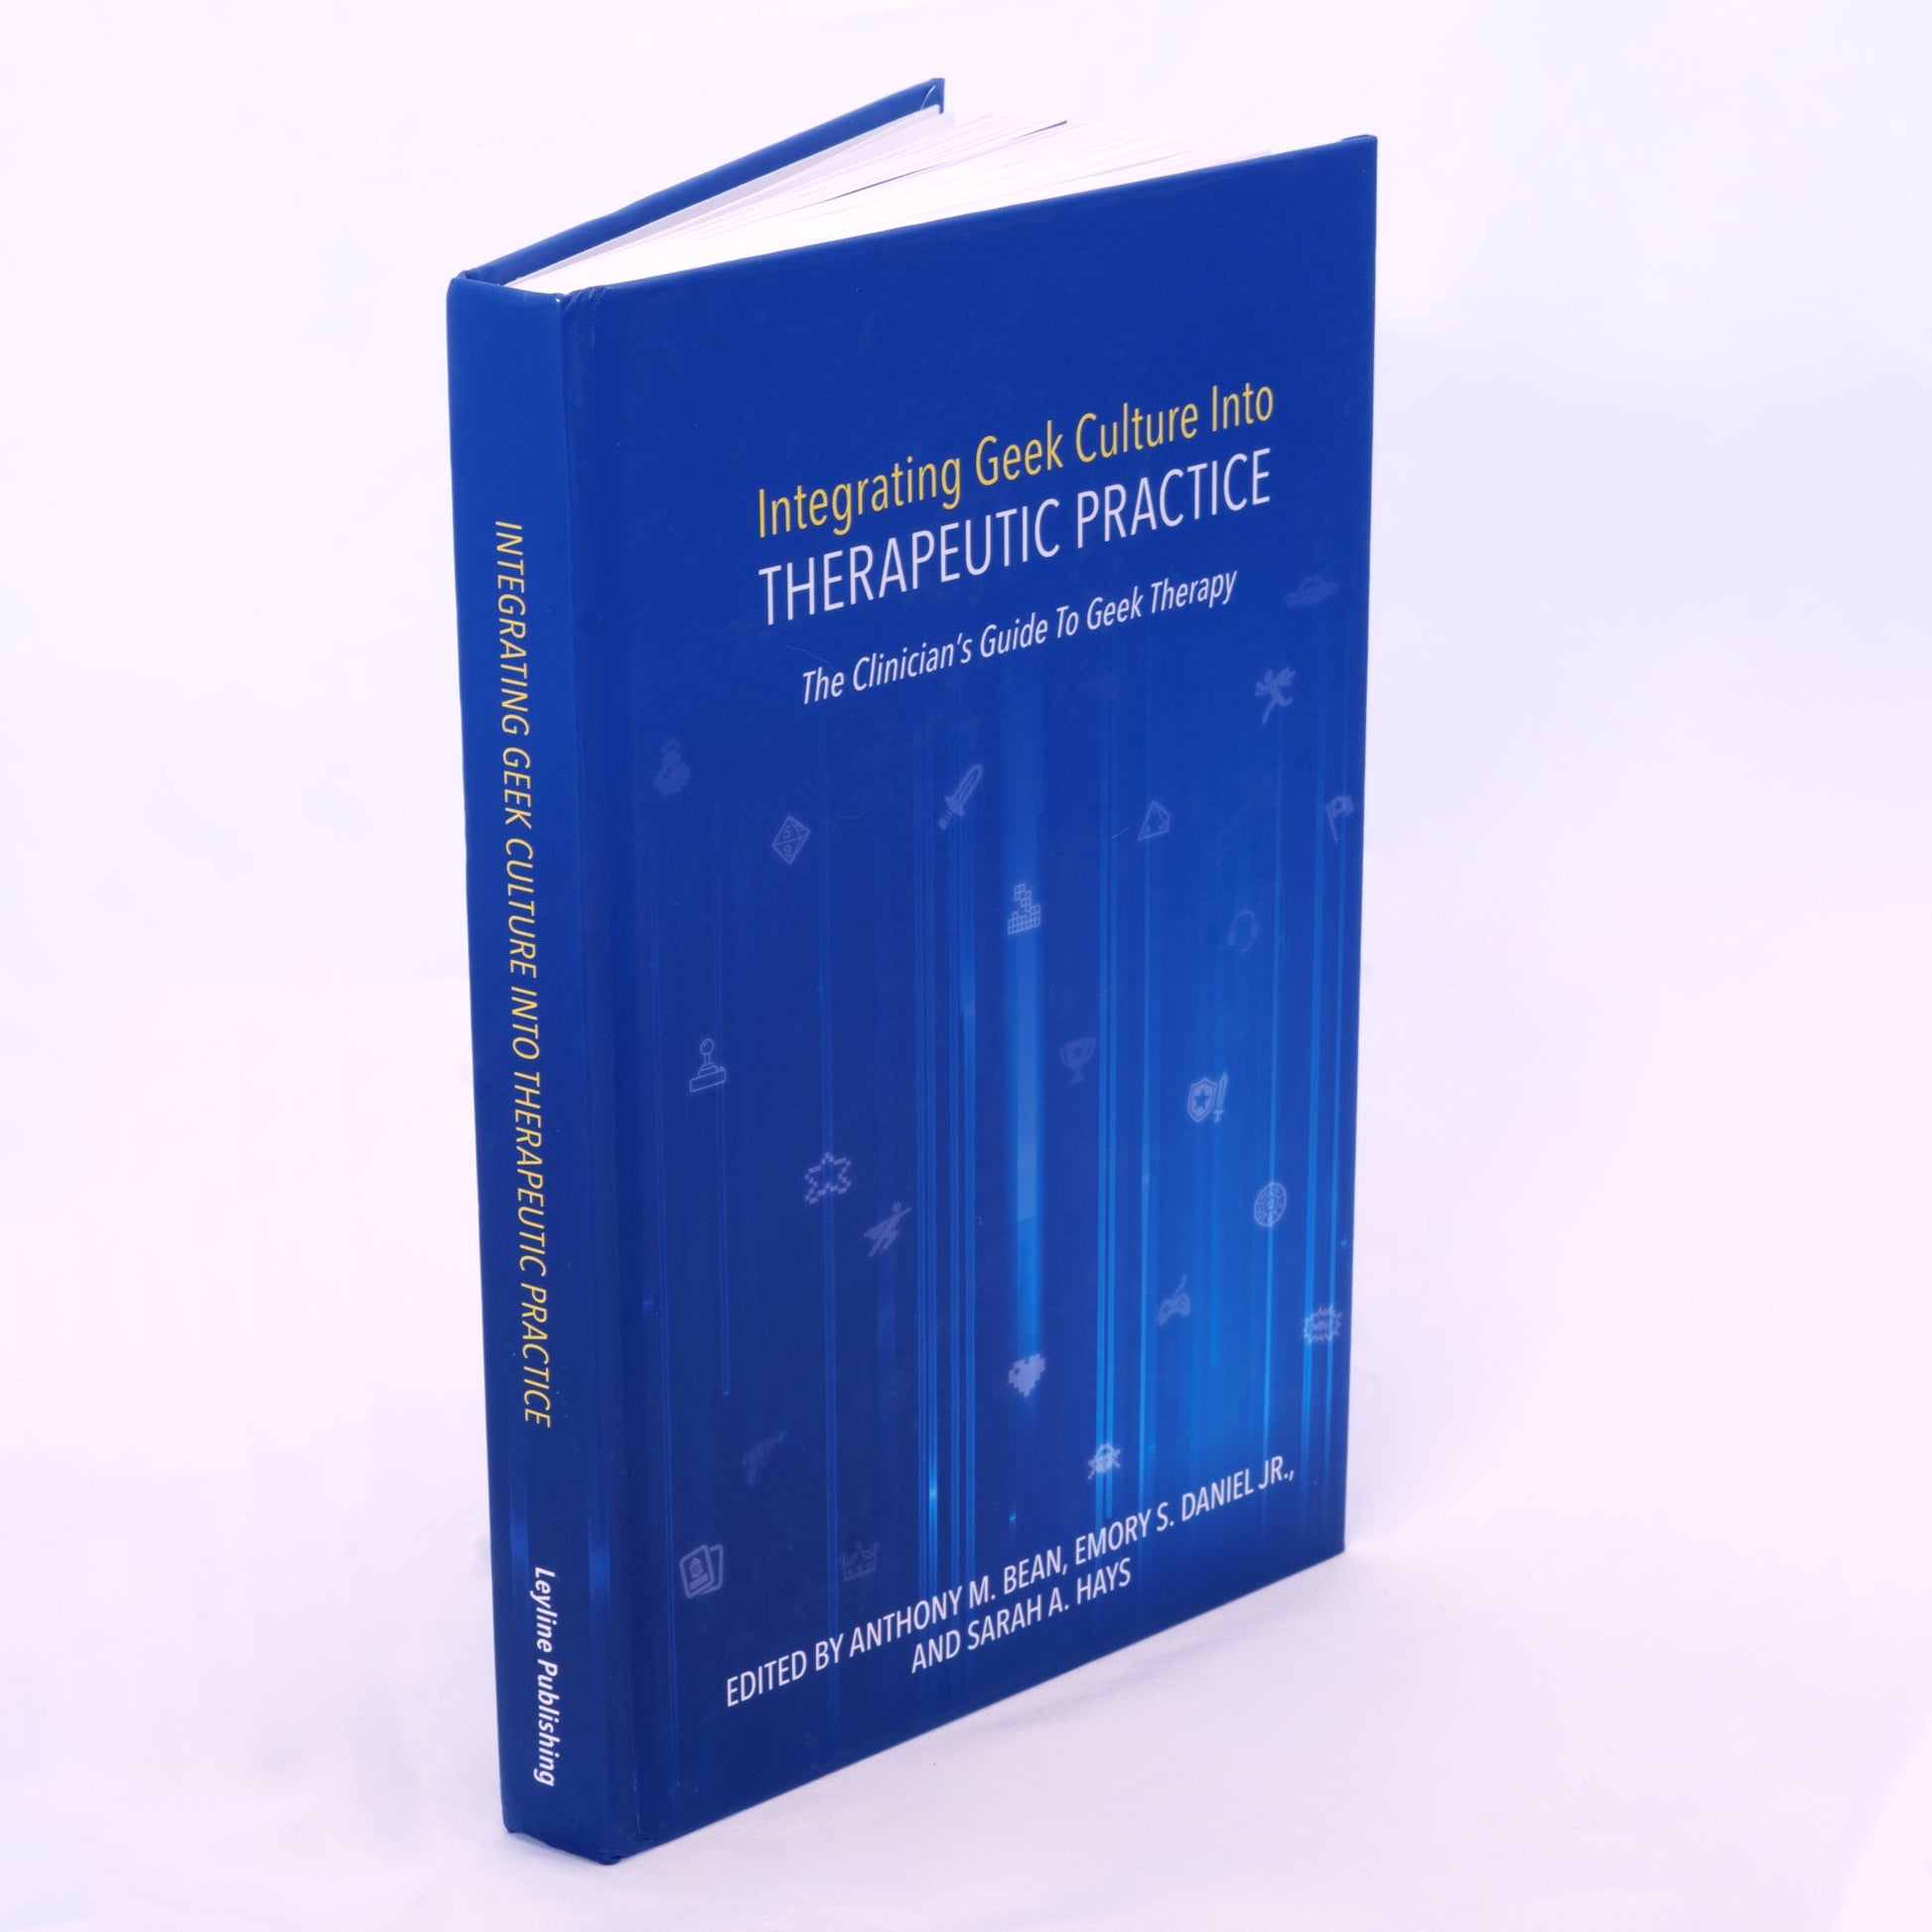 Integrating Geek Culture Into Therapeutic Practice: The Clinician's Guide To Geek Therapy - Geek Therapeutics